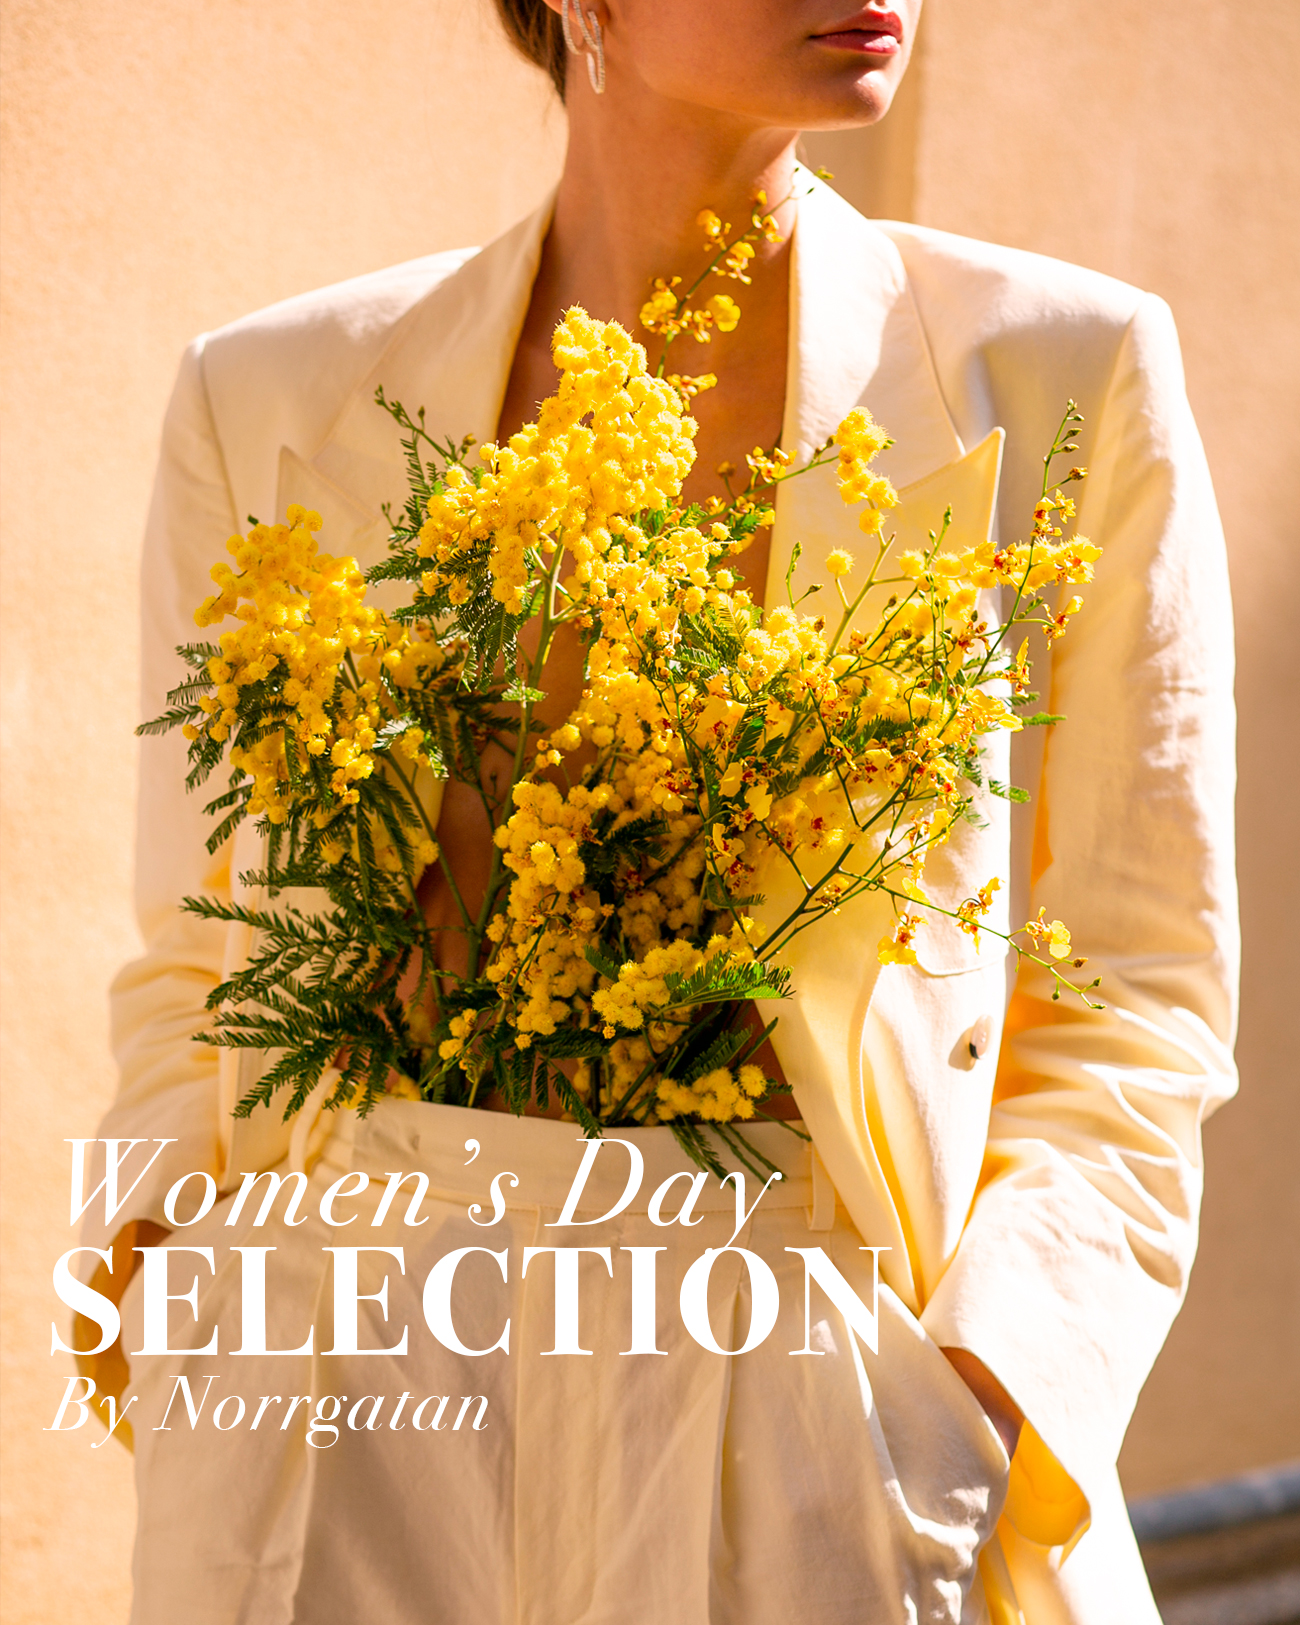 WOMEN'S DAY SELECTION